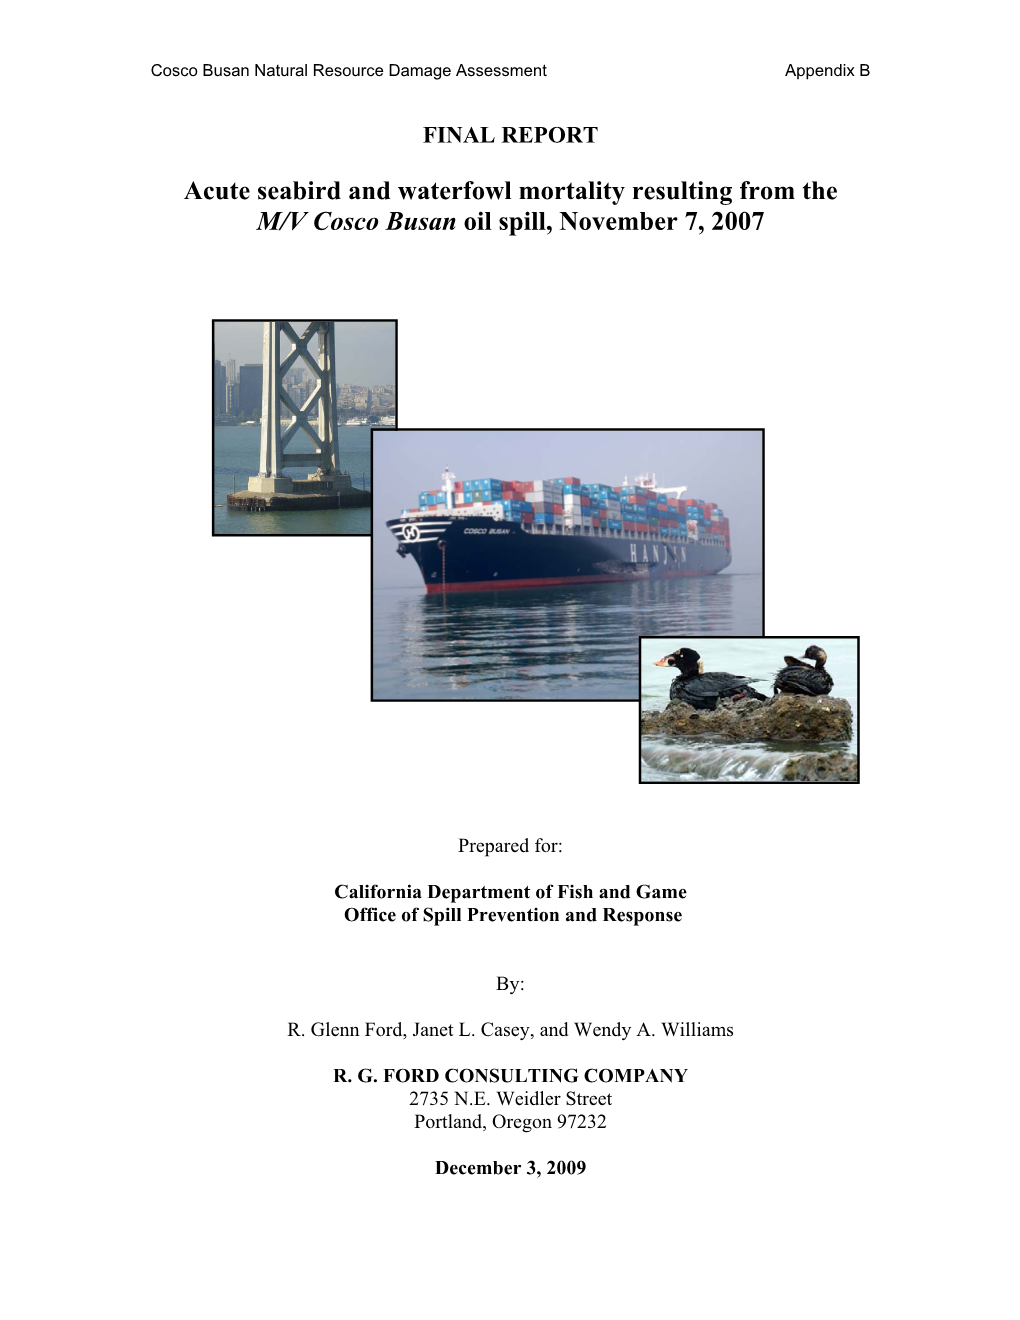 Acute Seabird and Waterfowl Mortality Resulting from the M/V Cosco Busan Oil Spill, November 7, 2007